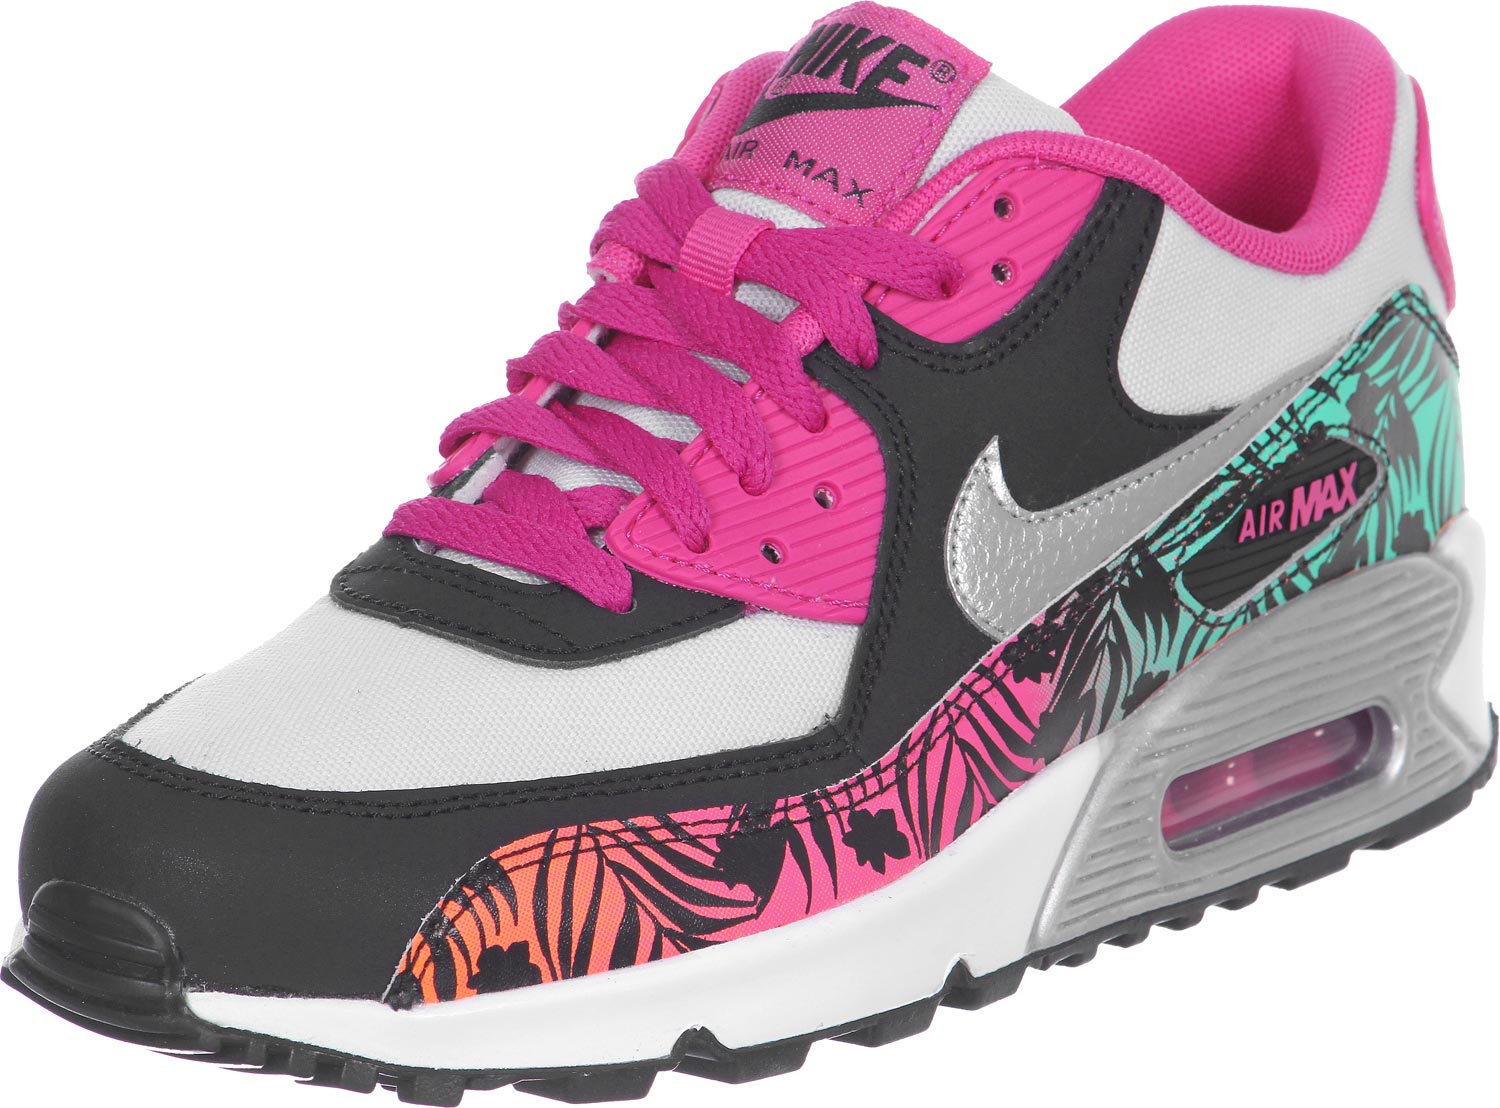 nike air max 90 print gs chaussures rose argent, Dhjga4270 Nike Air Max 90 Print Gs Chaussures Rose Argent Fascinant